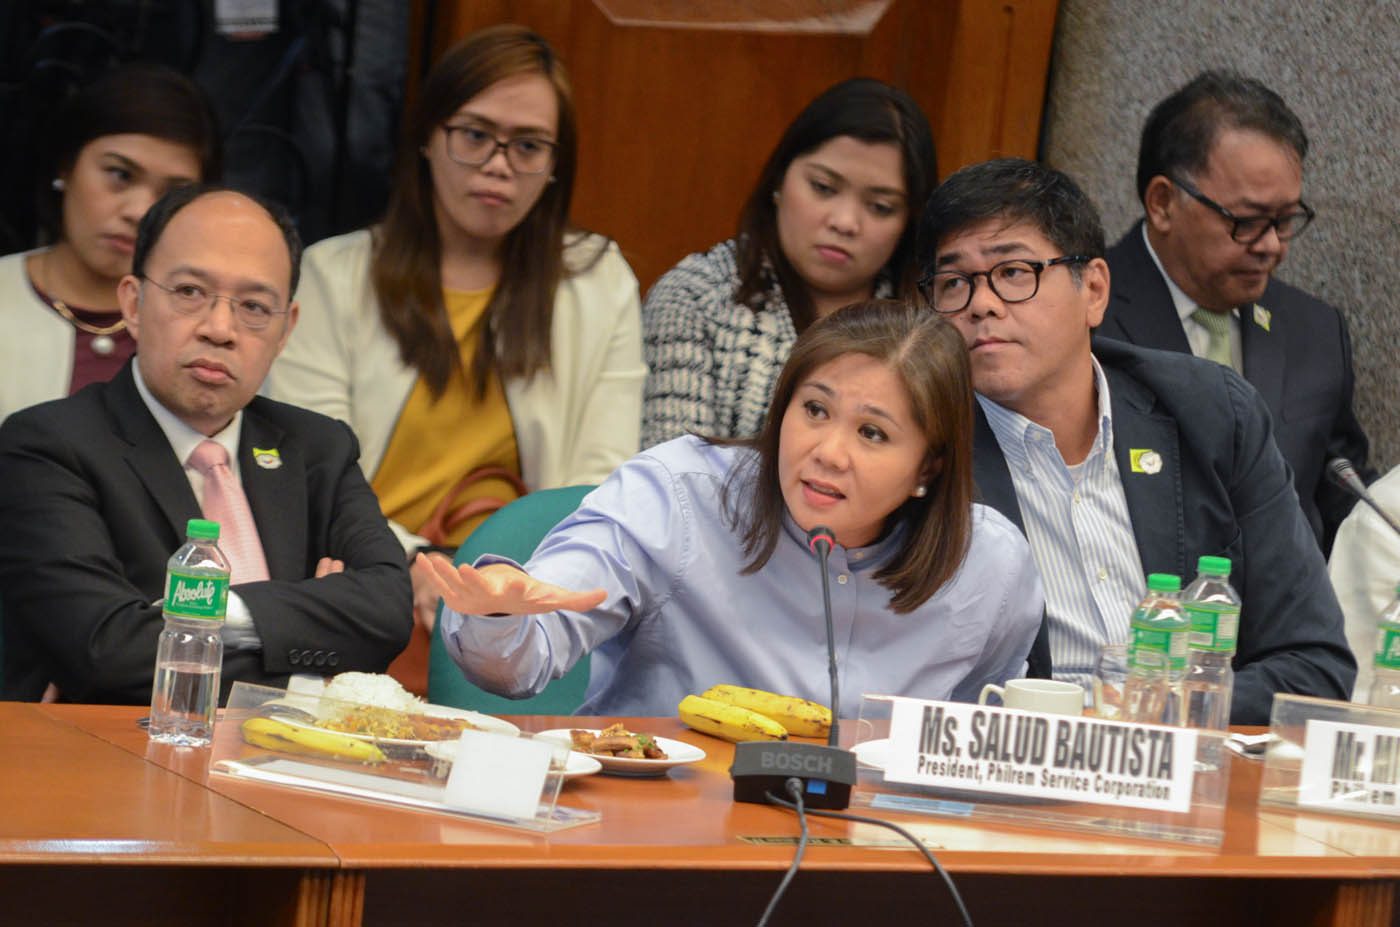 HE SAID, SHE SAID. PhilRem's Bautista says all $81 million had been delivered to Weikang Xu. Photo by Alecs Ongcal/Rappler   